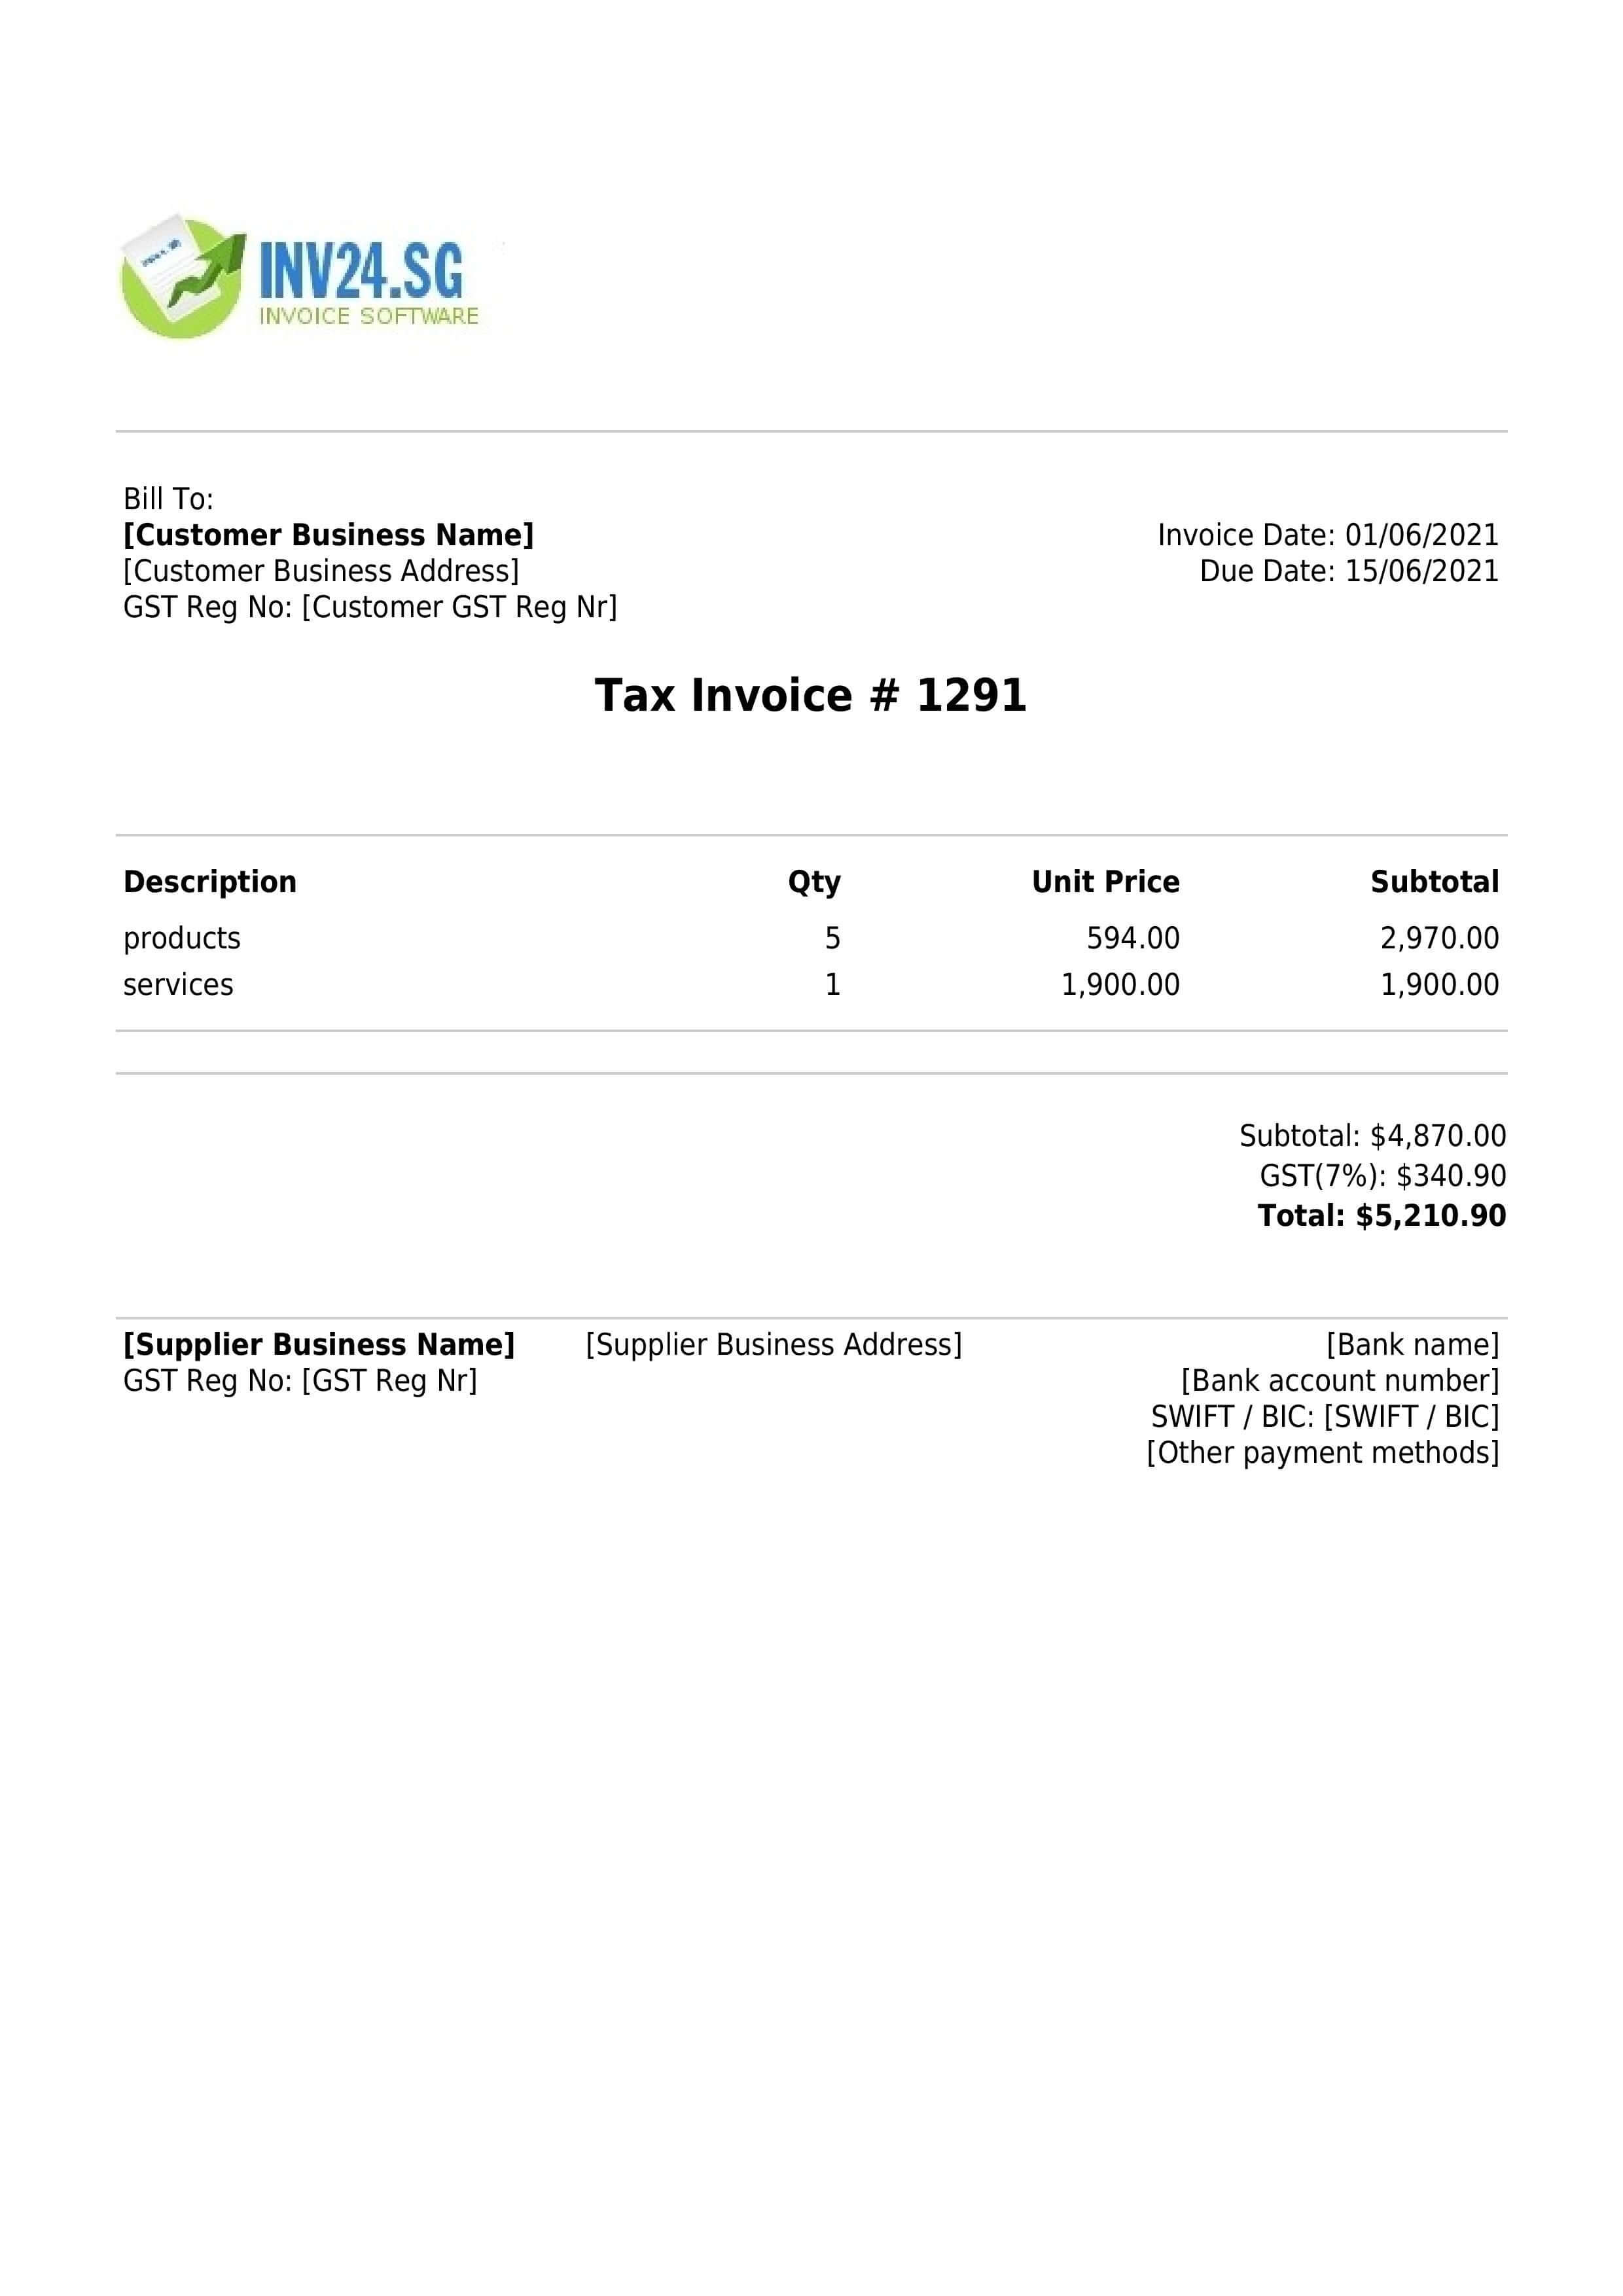 A Singapore invoice sample with mandatory and optional fields